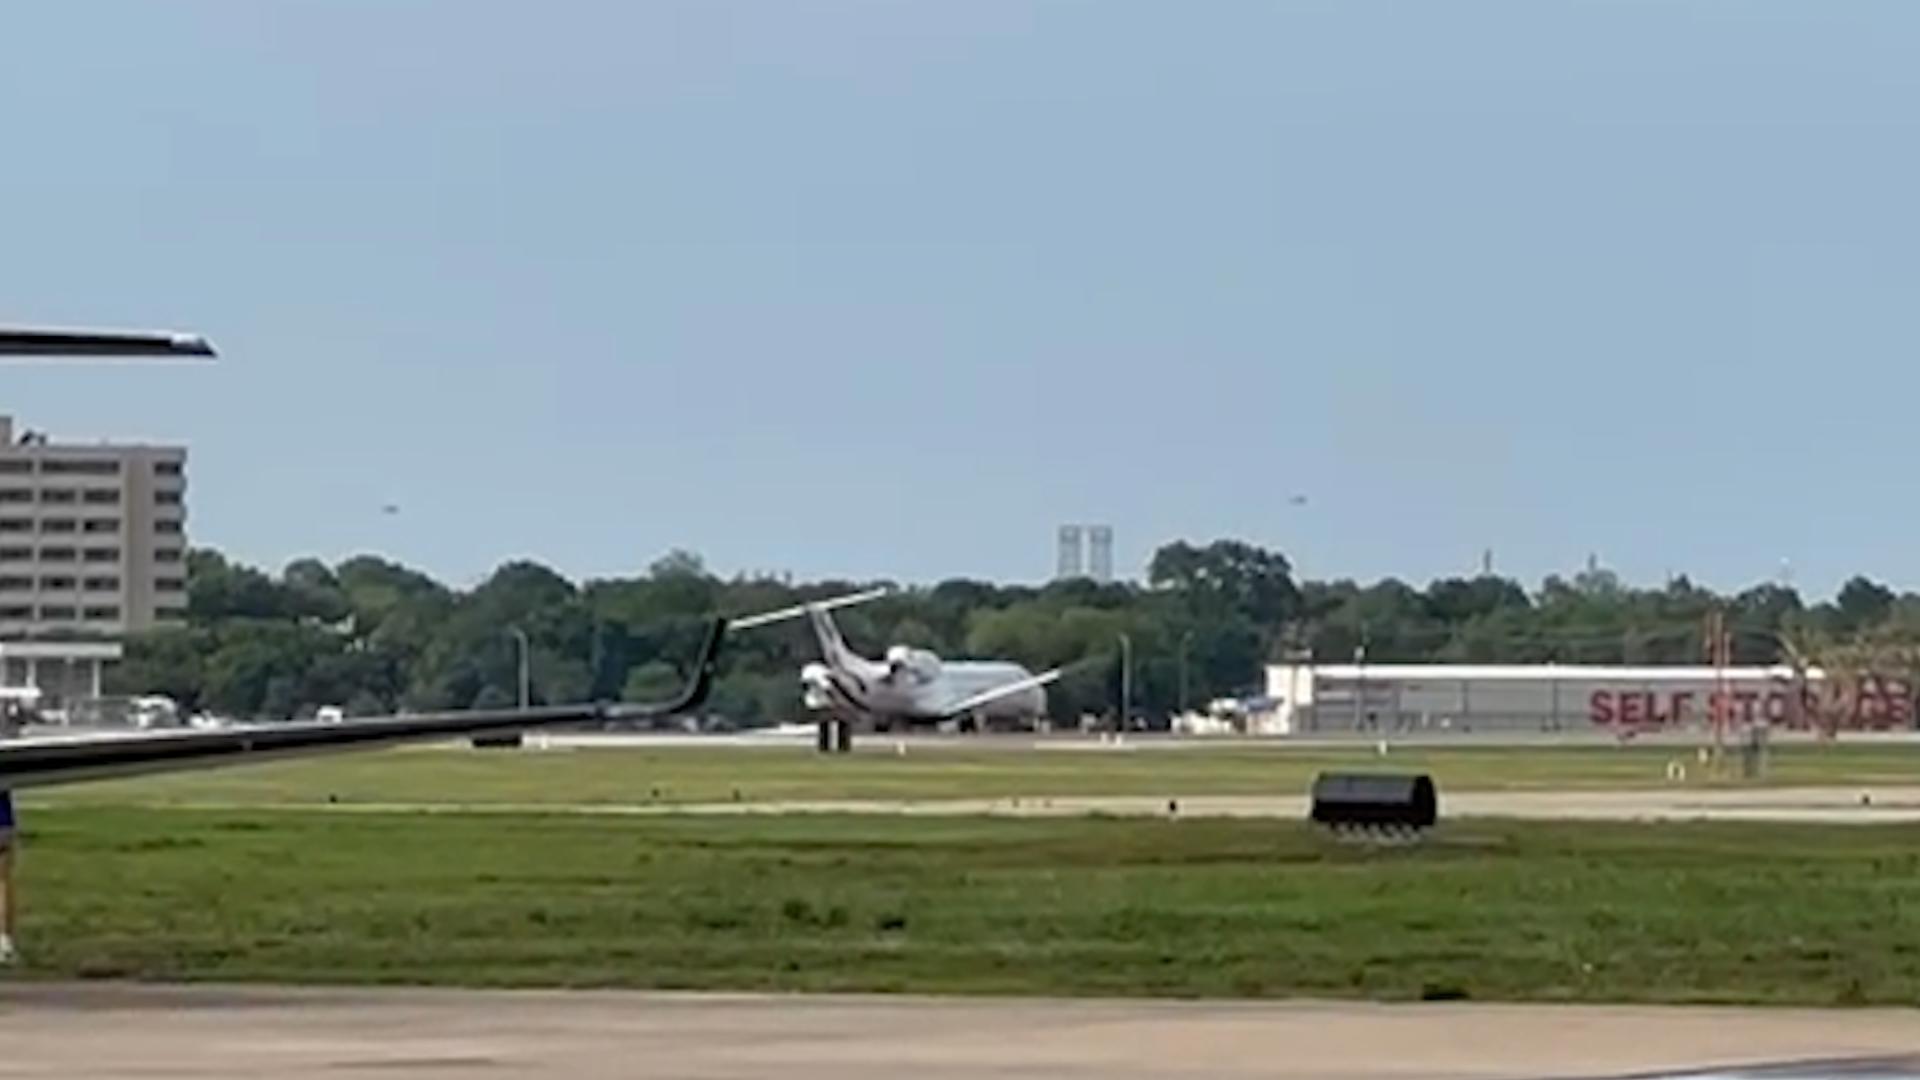 The airport said at around 6 p.m. Friday, a private JSX charter aircraft experienced a landing gear collapse after touching down on Runway 4 at Hobby.